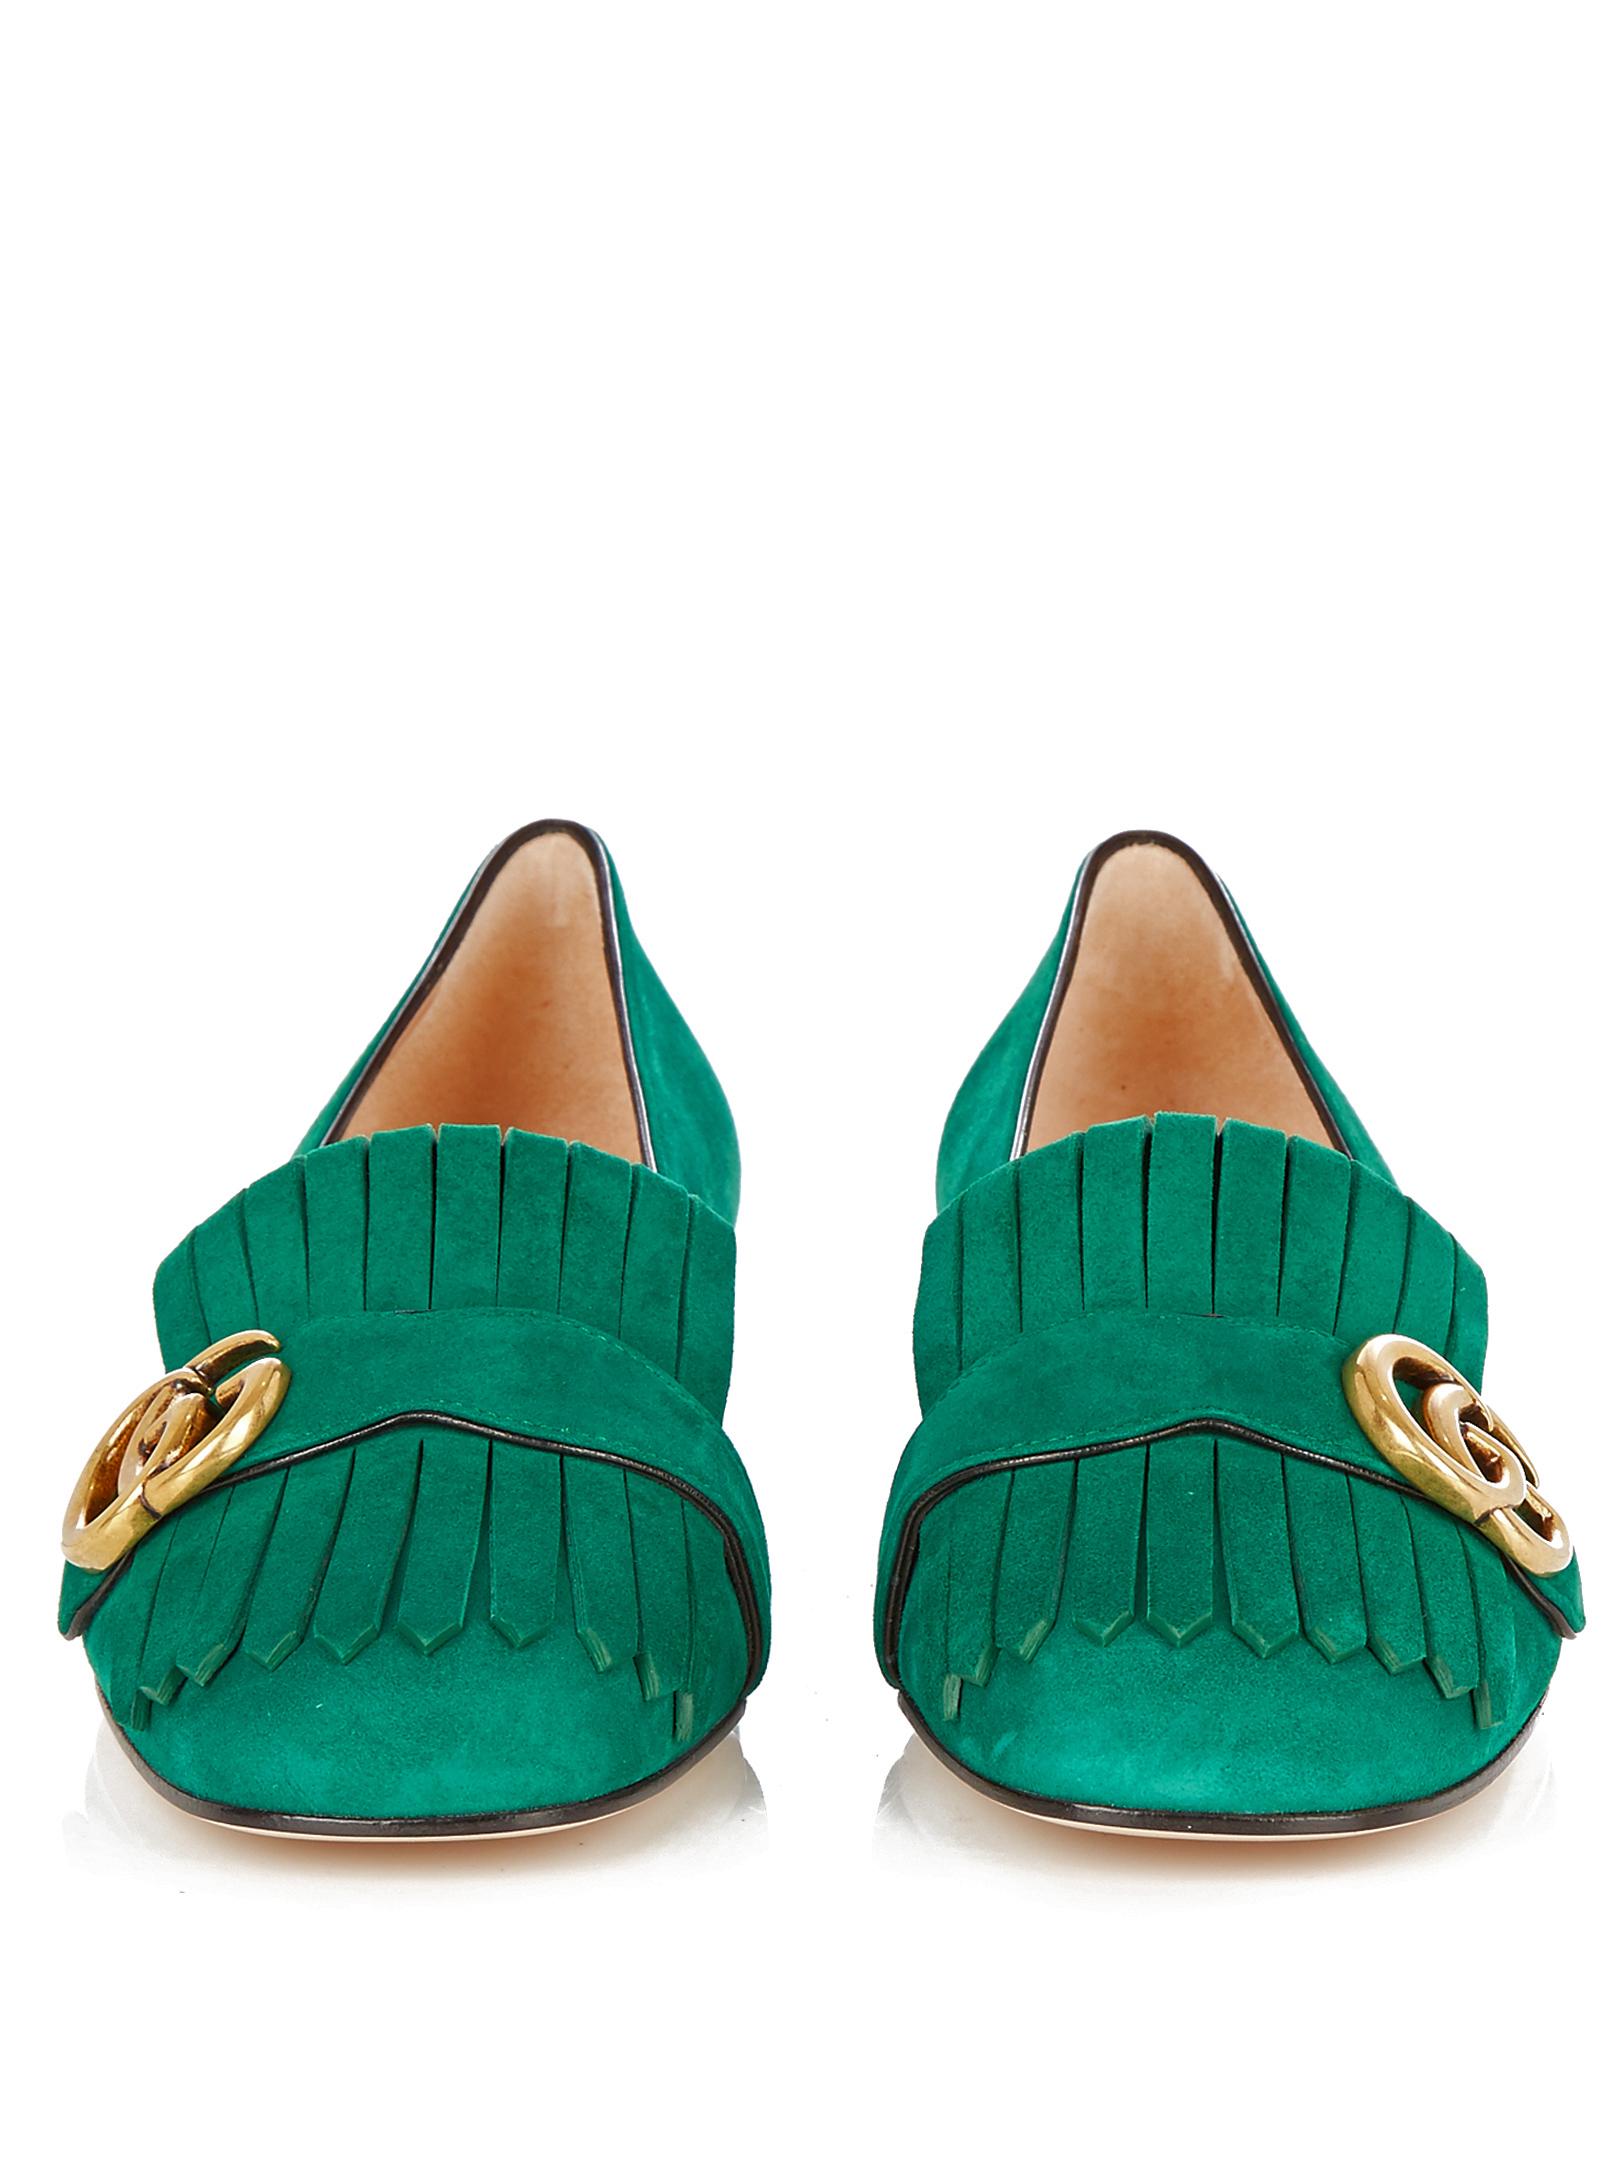 Gucci Marmont Fringed Suede Loafers in Lyst